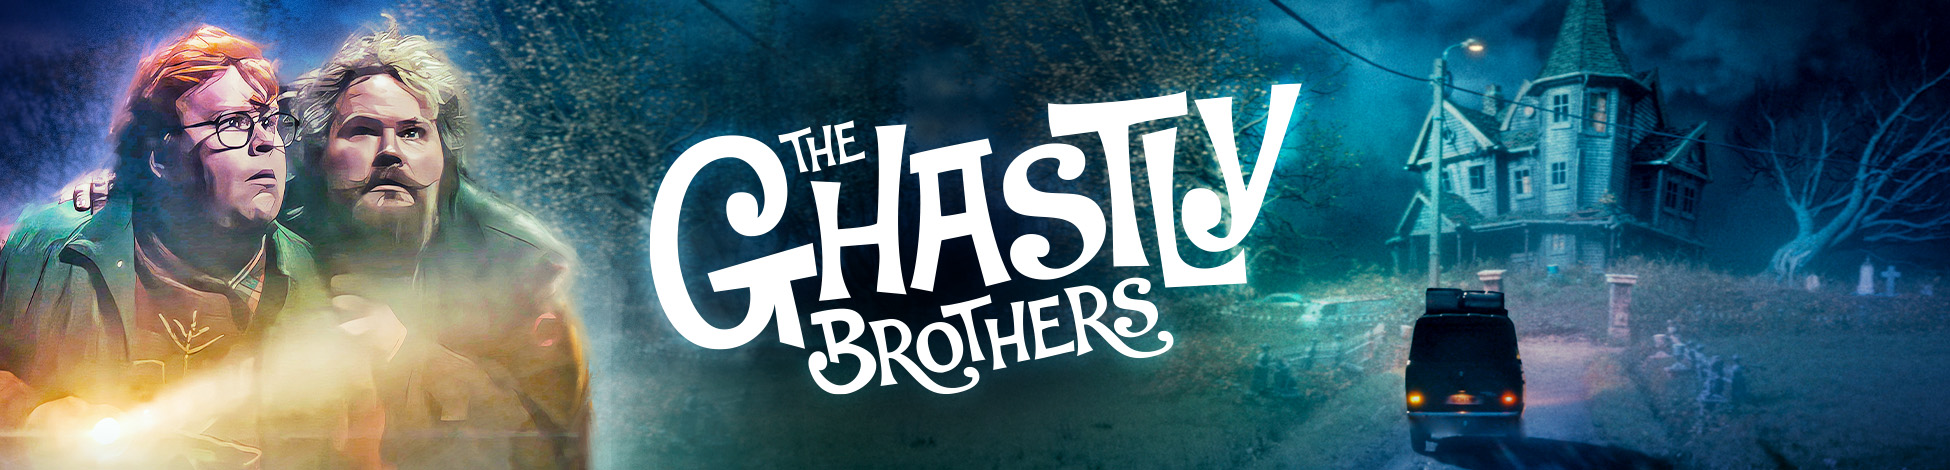 The Ghastly Brothers